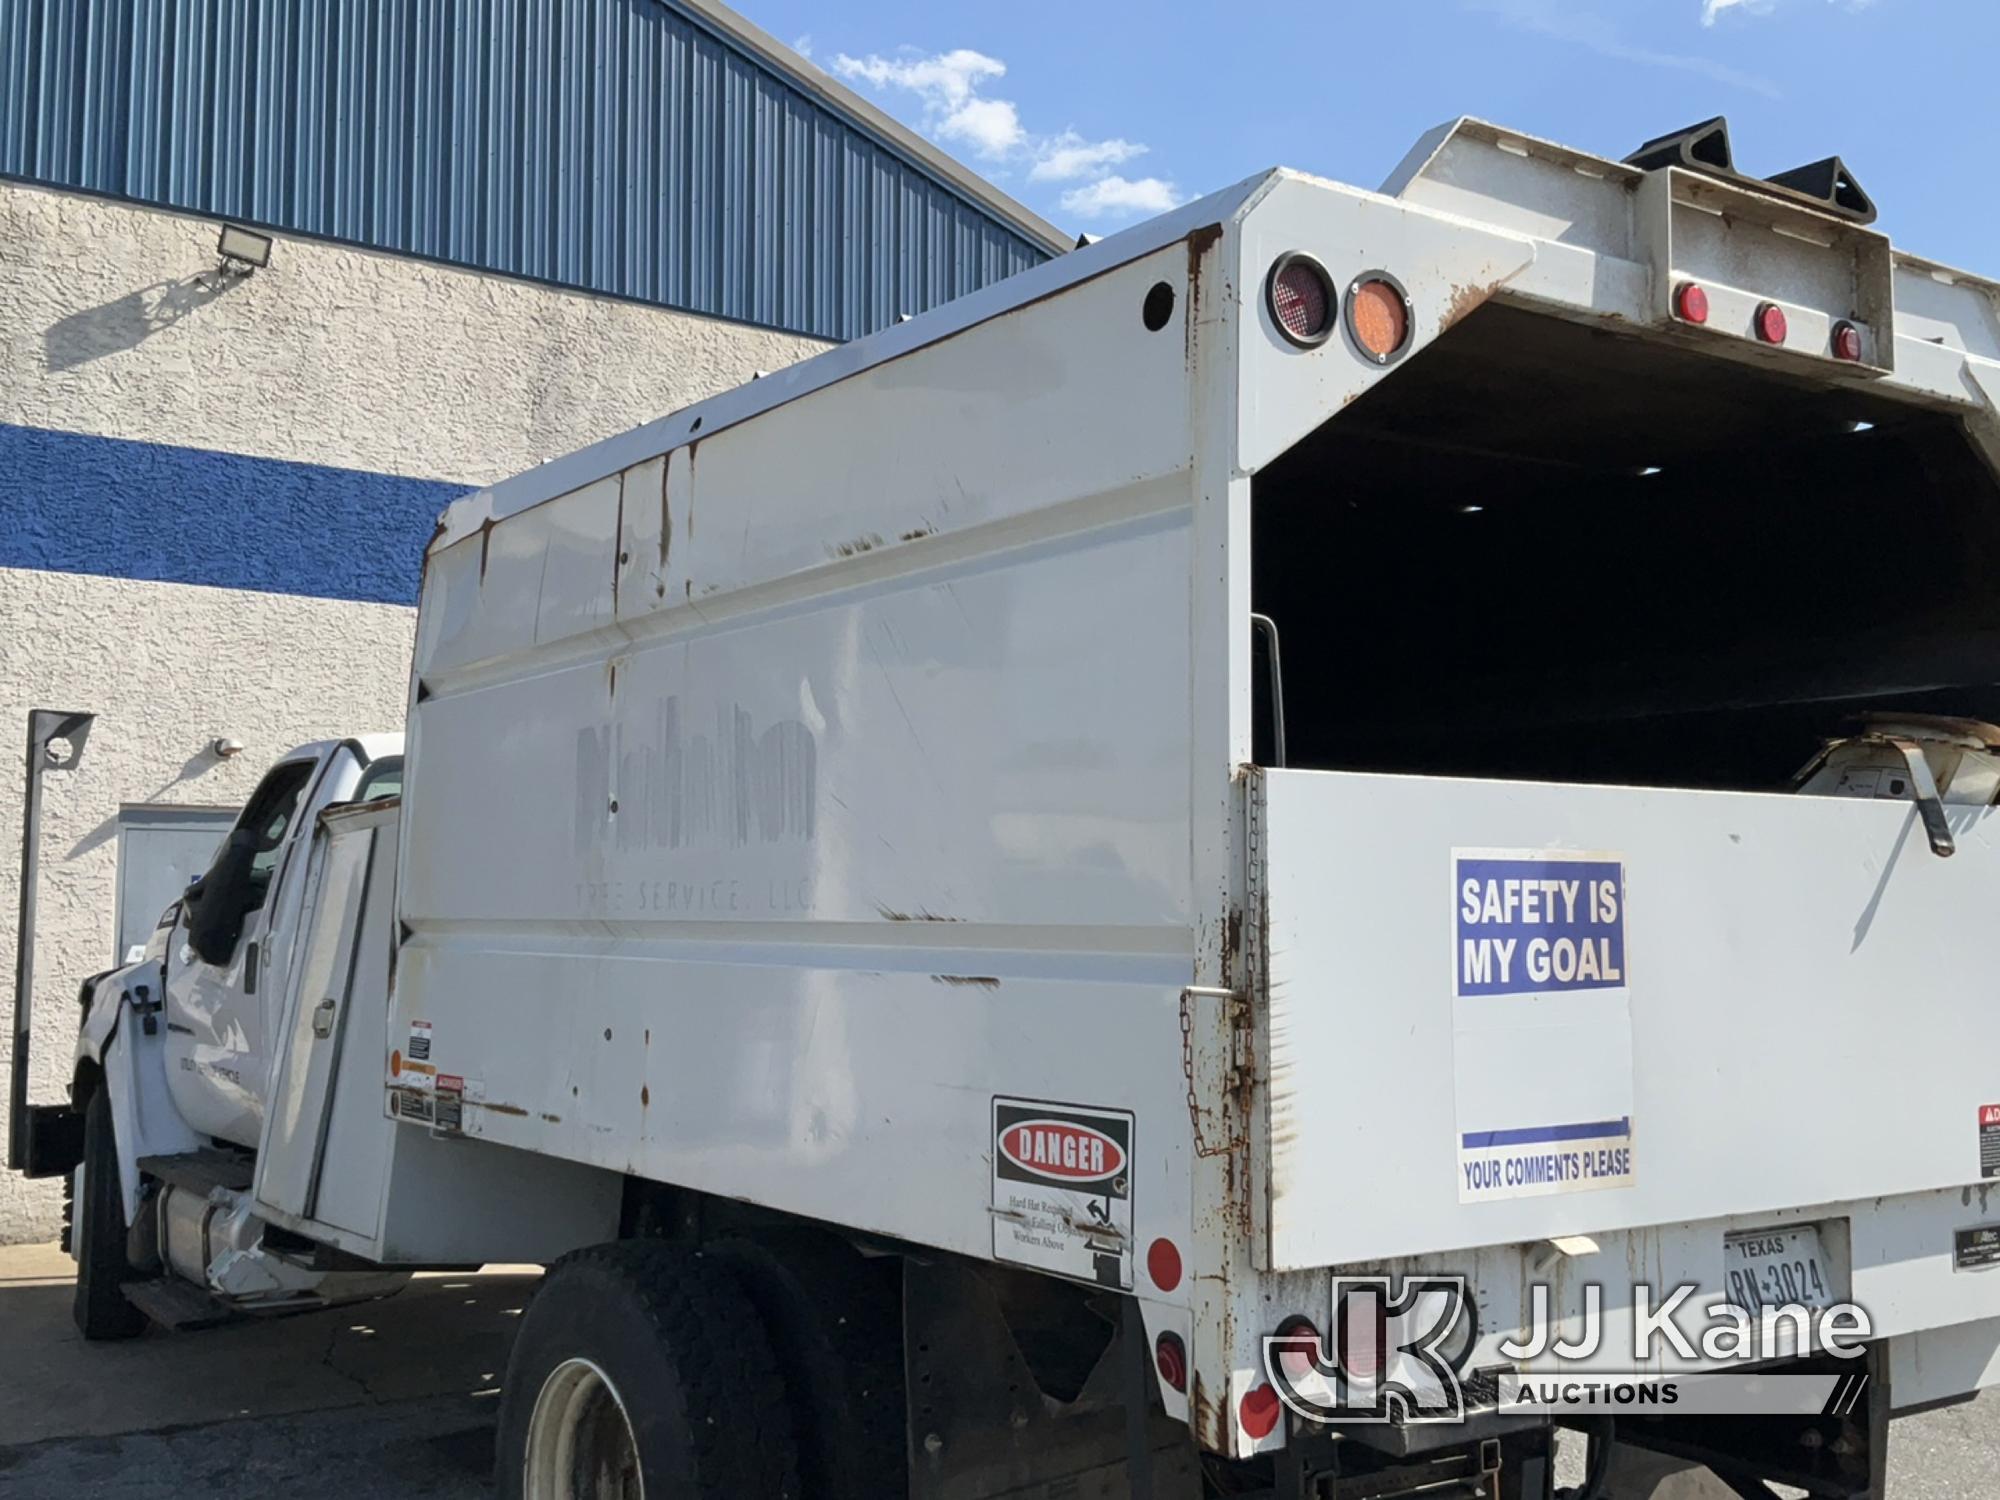 (Chester Springs, PA) 2017 Ford F750 Chipper Dump Truck Wrecked, Not Running, Condition Unknown, Loc